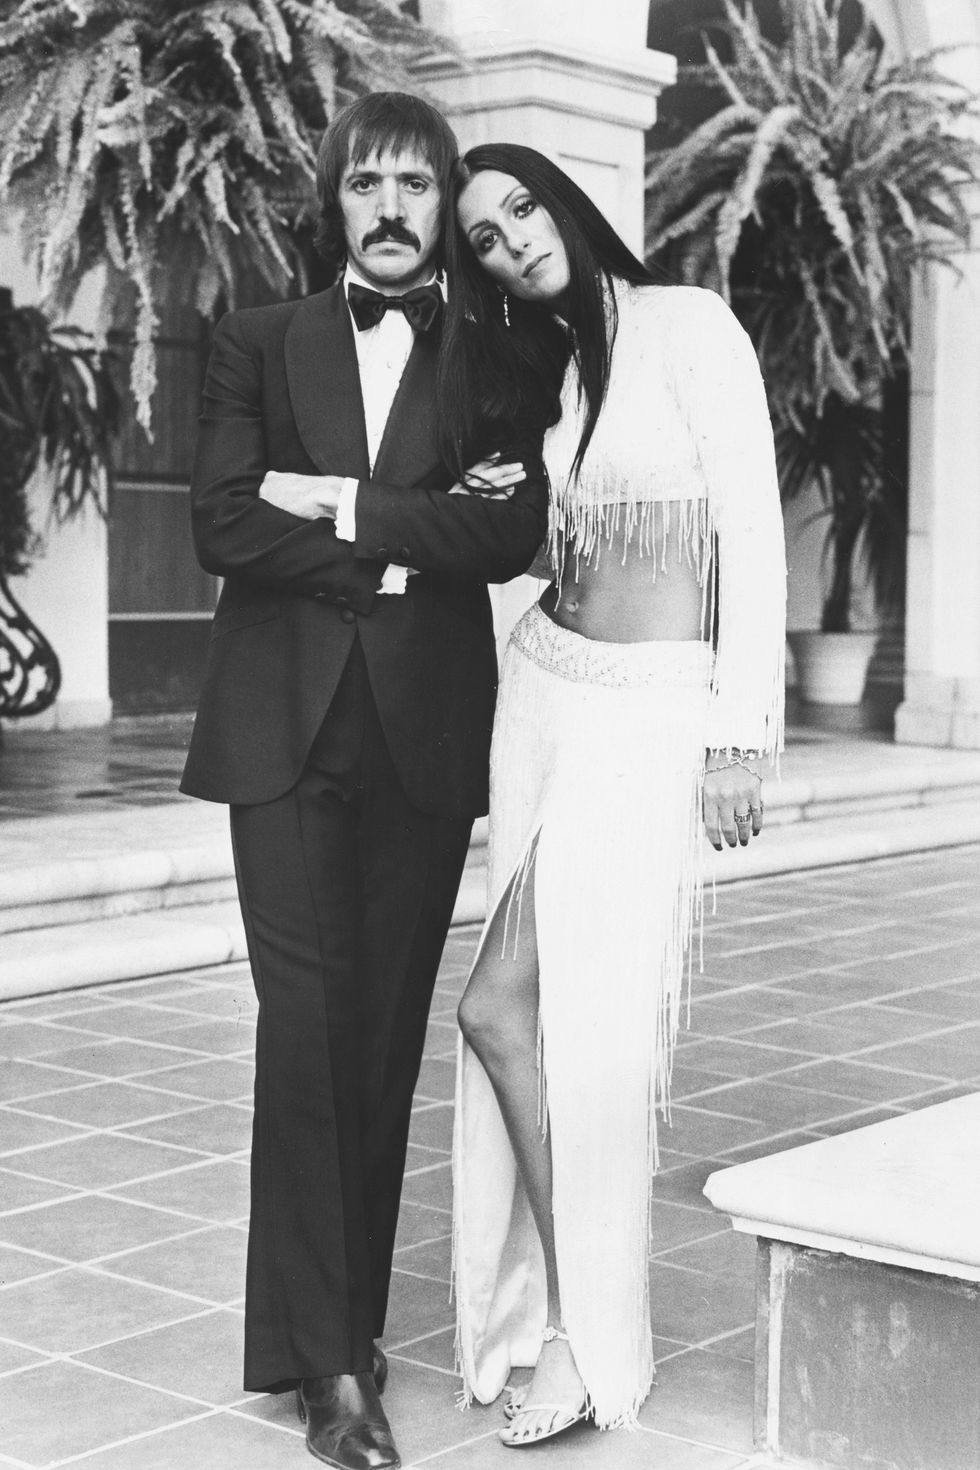 Portrait of singing duo Sonny Bono and Cher, wearing formal dress on an outdoor patio, circa 1975. (Photo by Archive Photos/Moviepix/Getty Images)